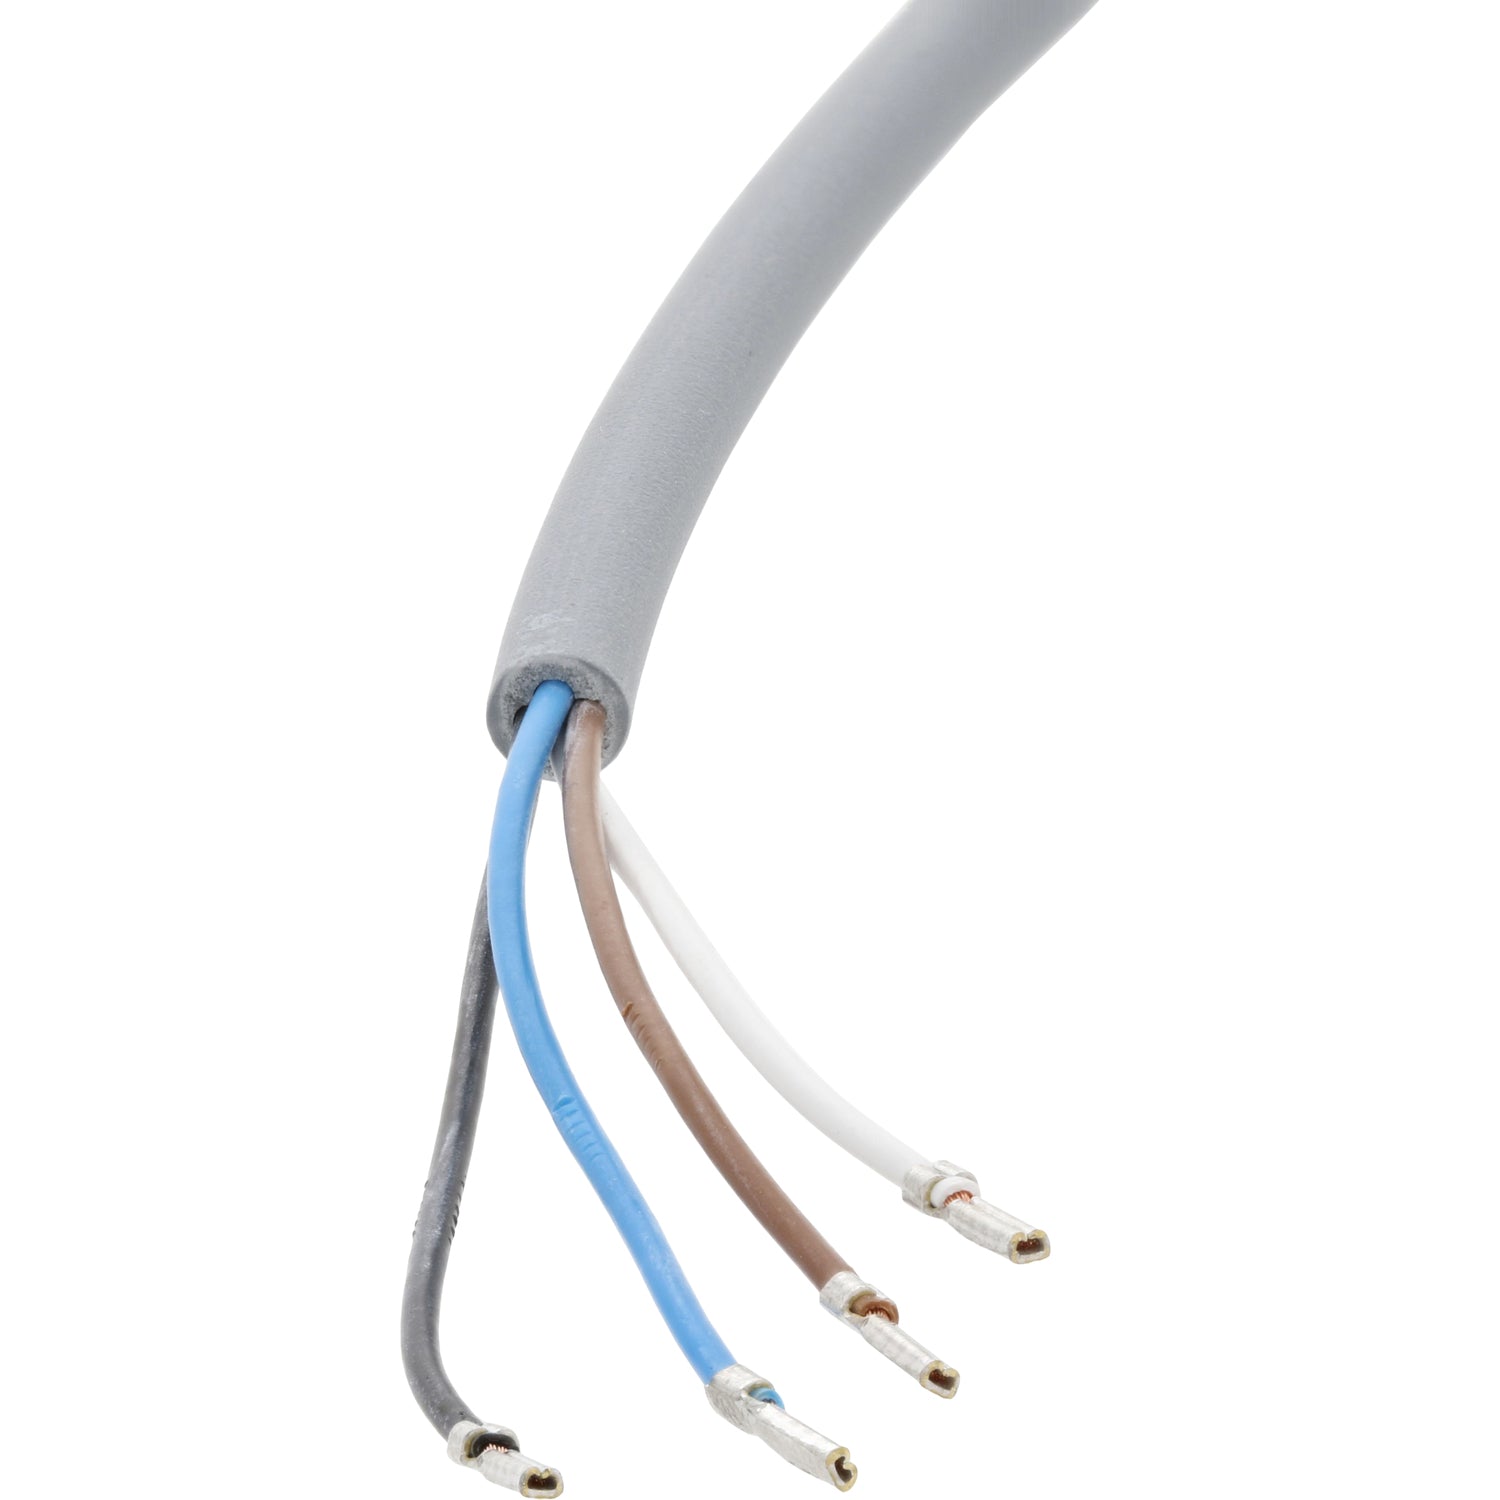 Grey connecting cable with exposed black, blue, brown and white wires on white background. 